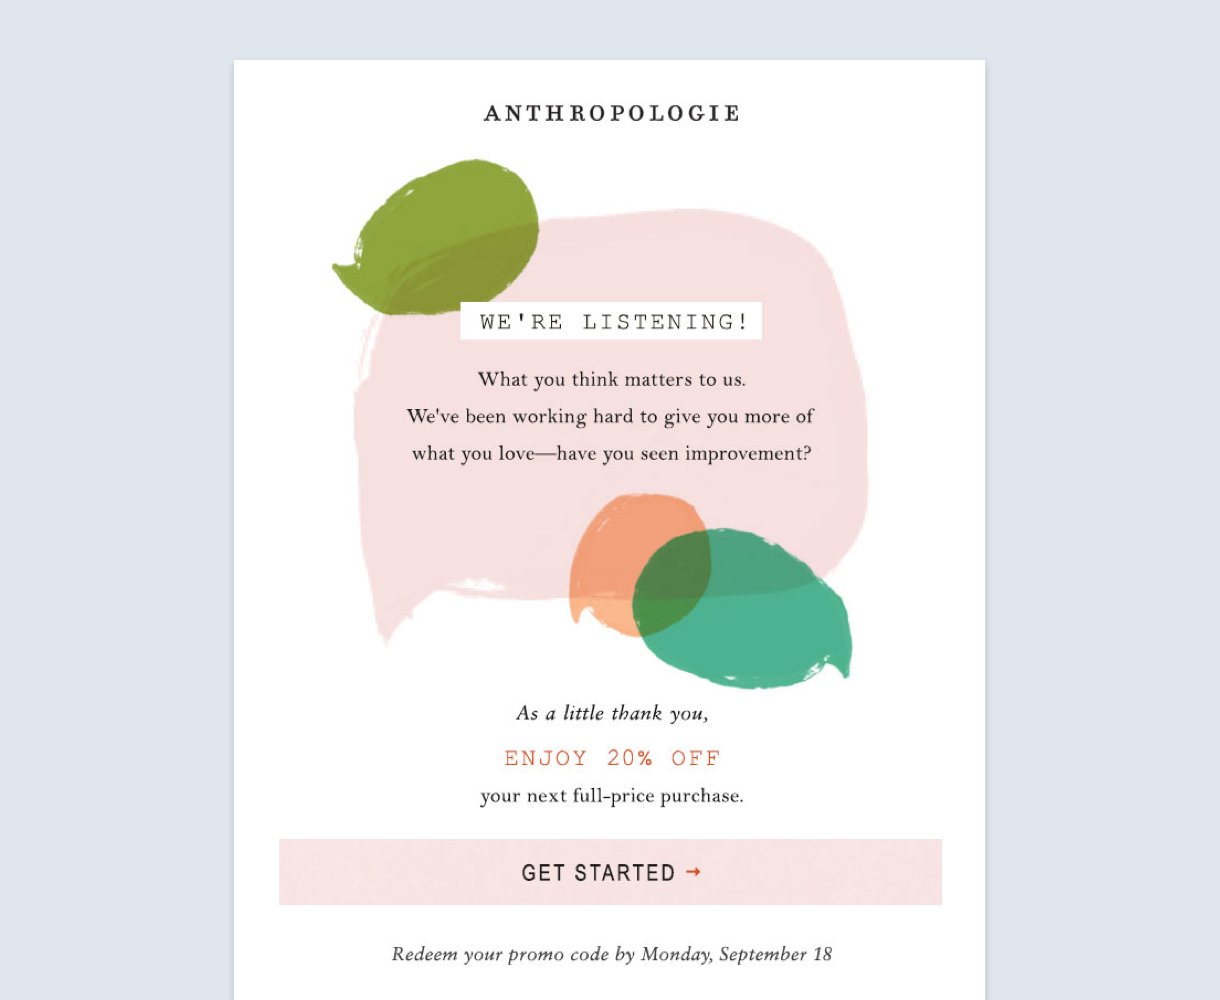 Anthropologie feedback loop example light pink pastel colors button background